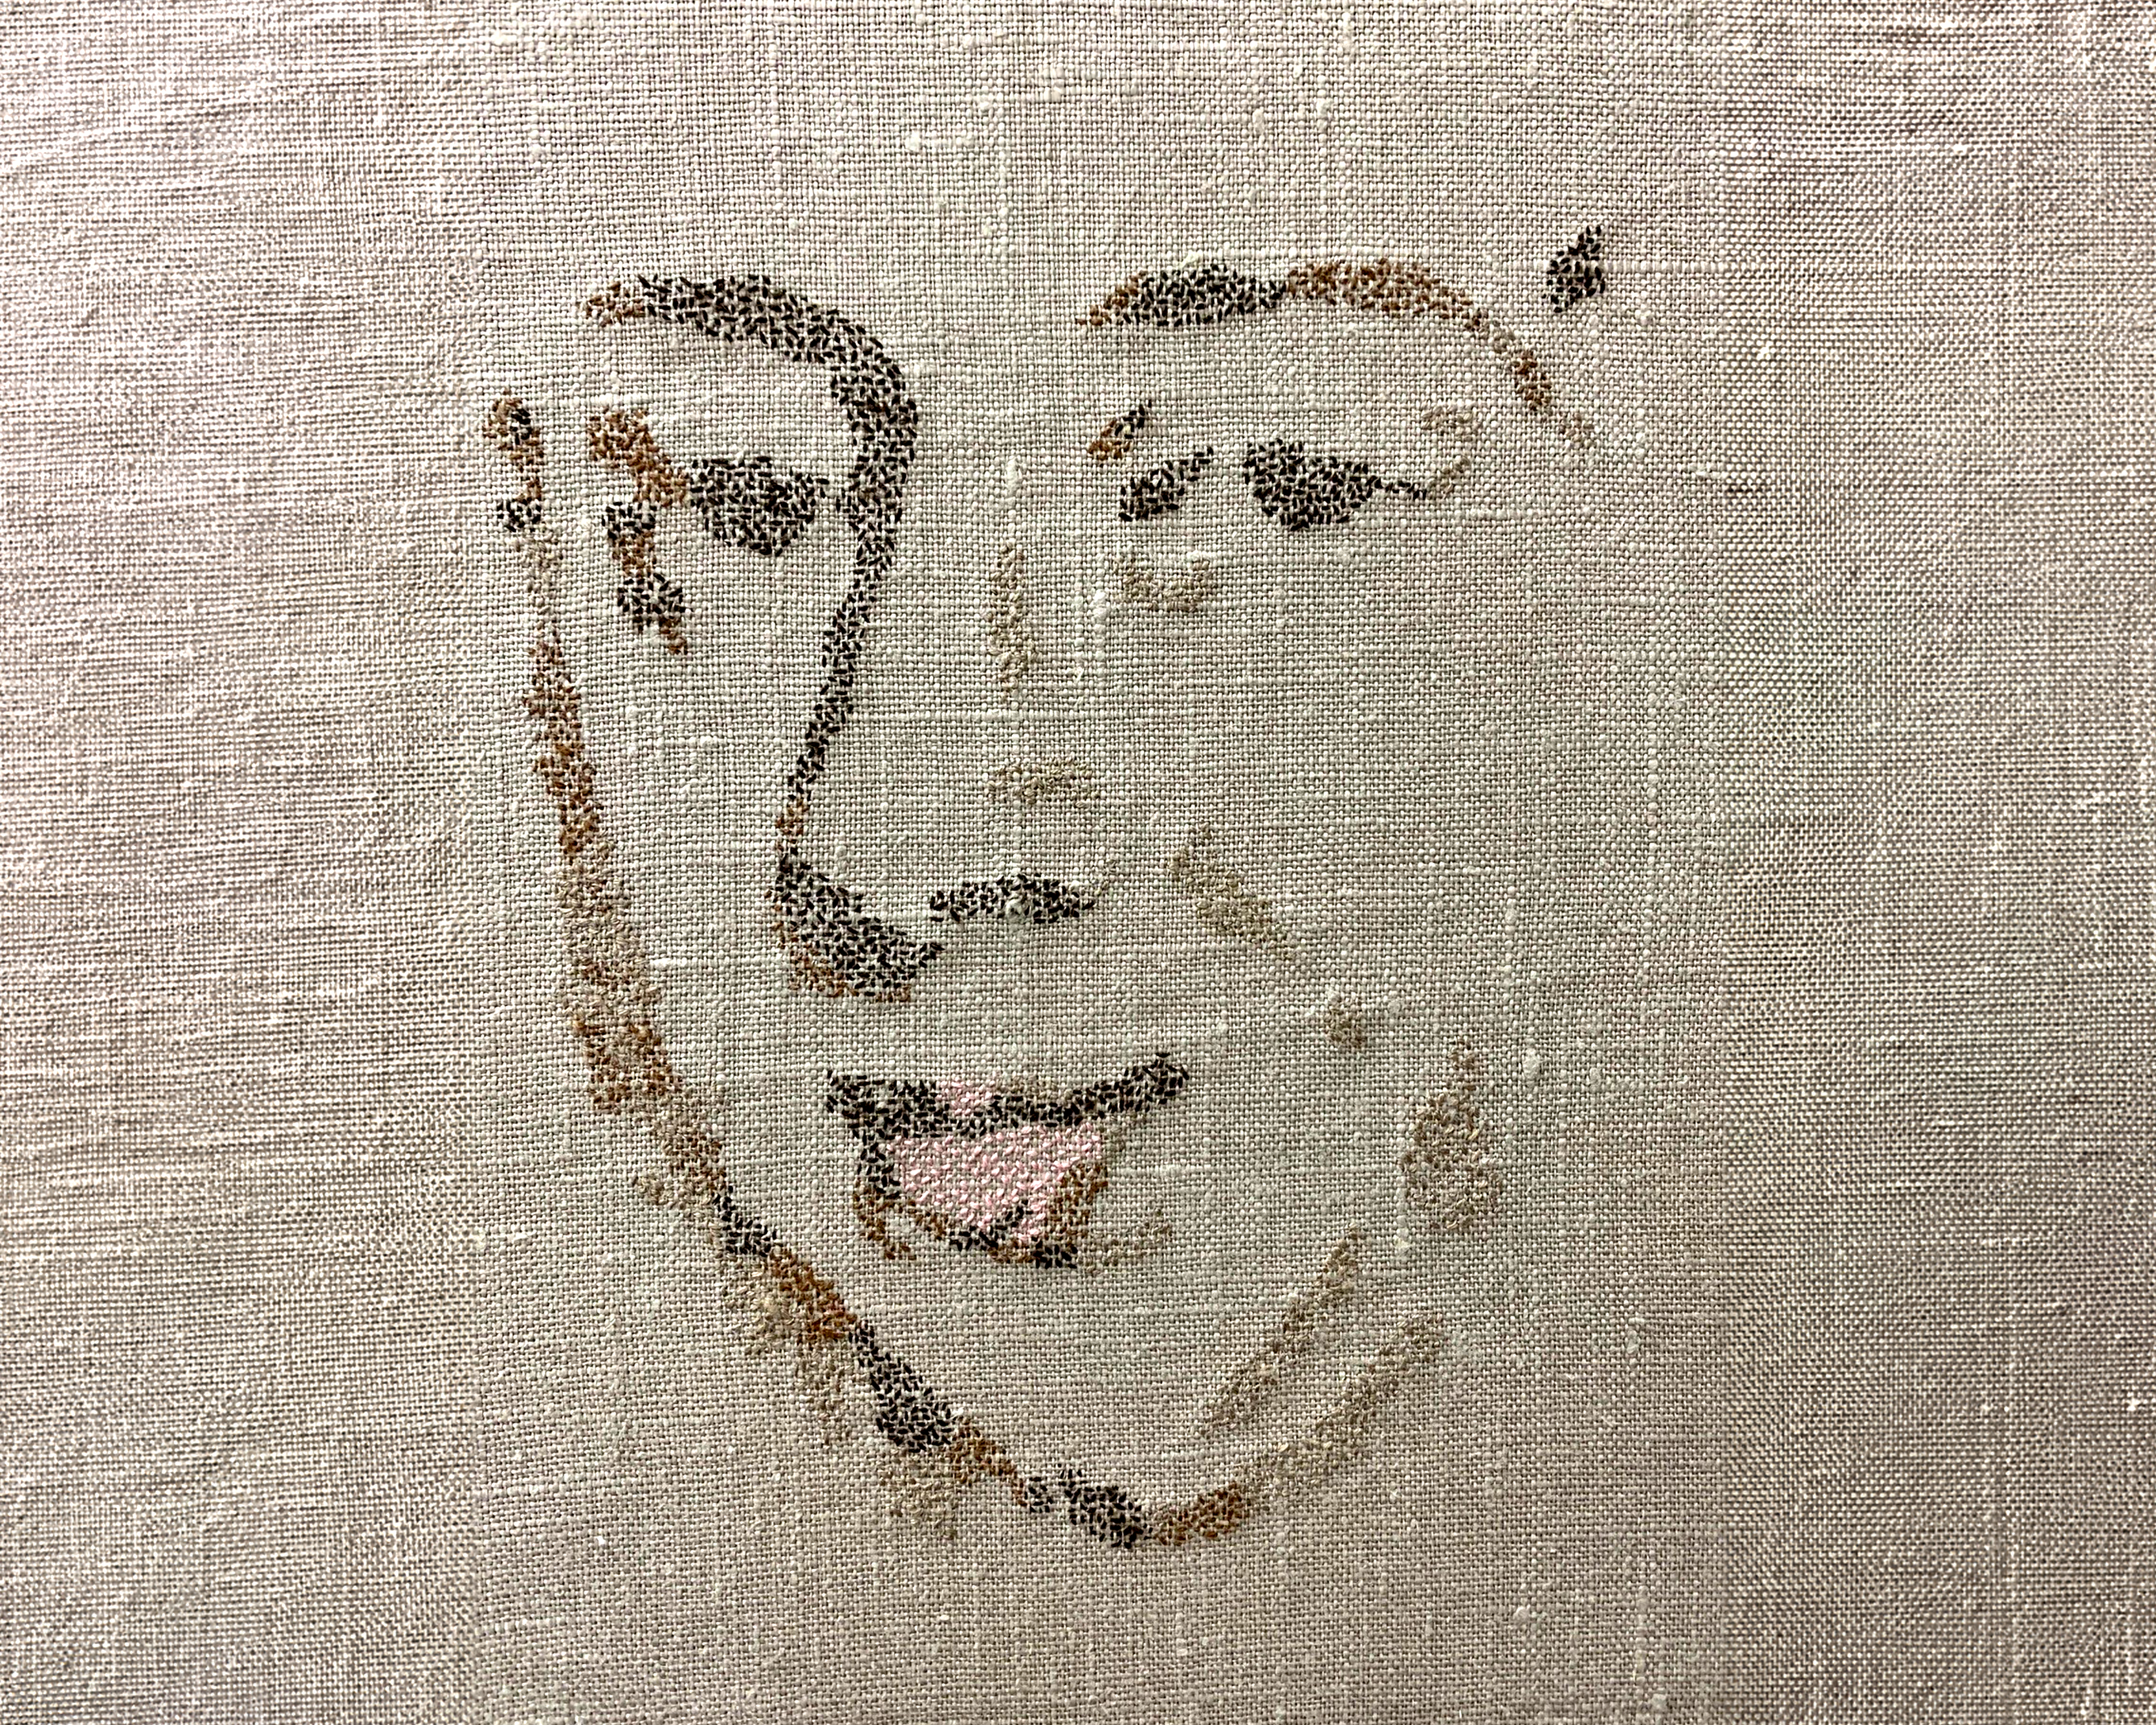 An image of a stitched portrait on canvas material.